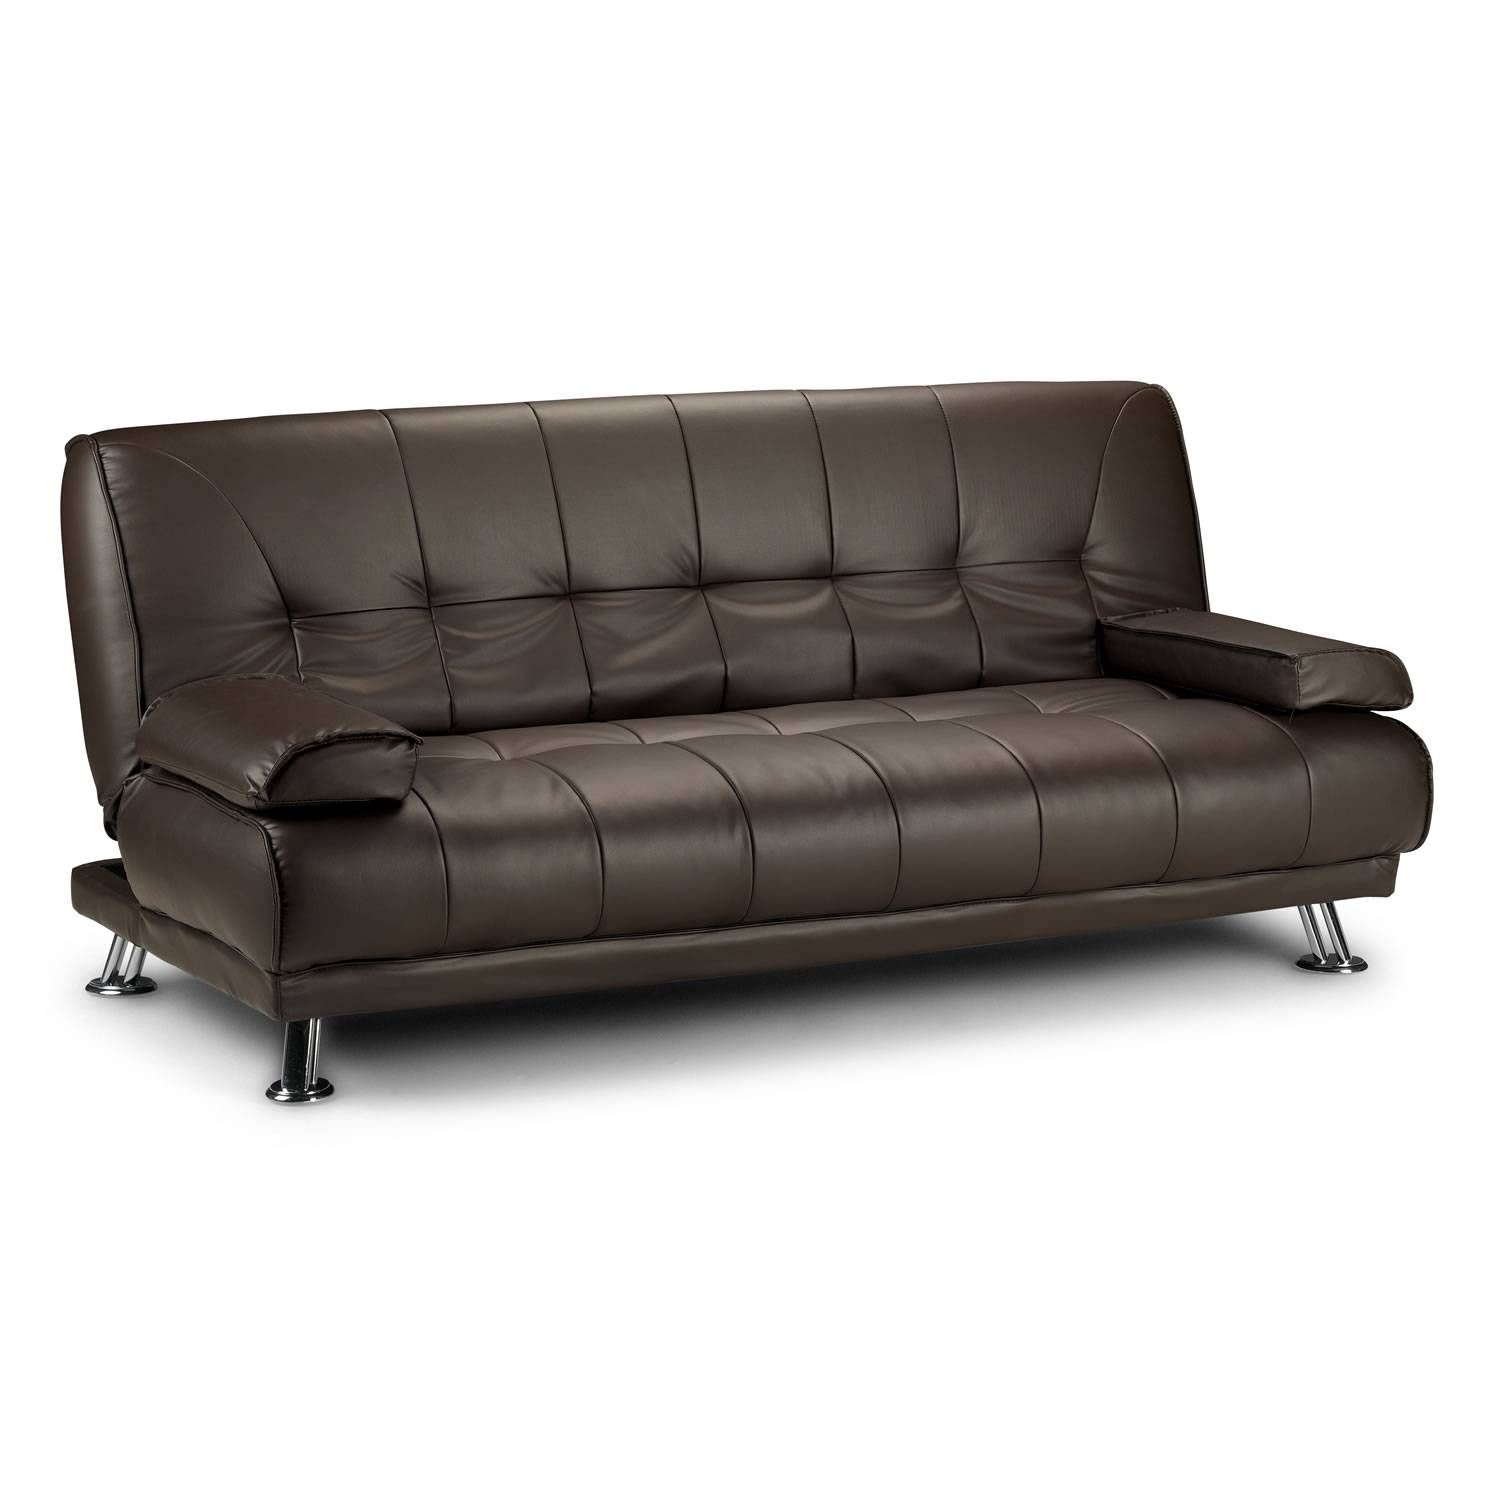 Click Clack Sofa Bed With Storage Enchanting Click Clack Sofa Intended For Leather Sofa Beds With Storage (Photo 12 of 30)